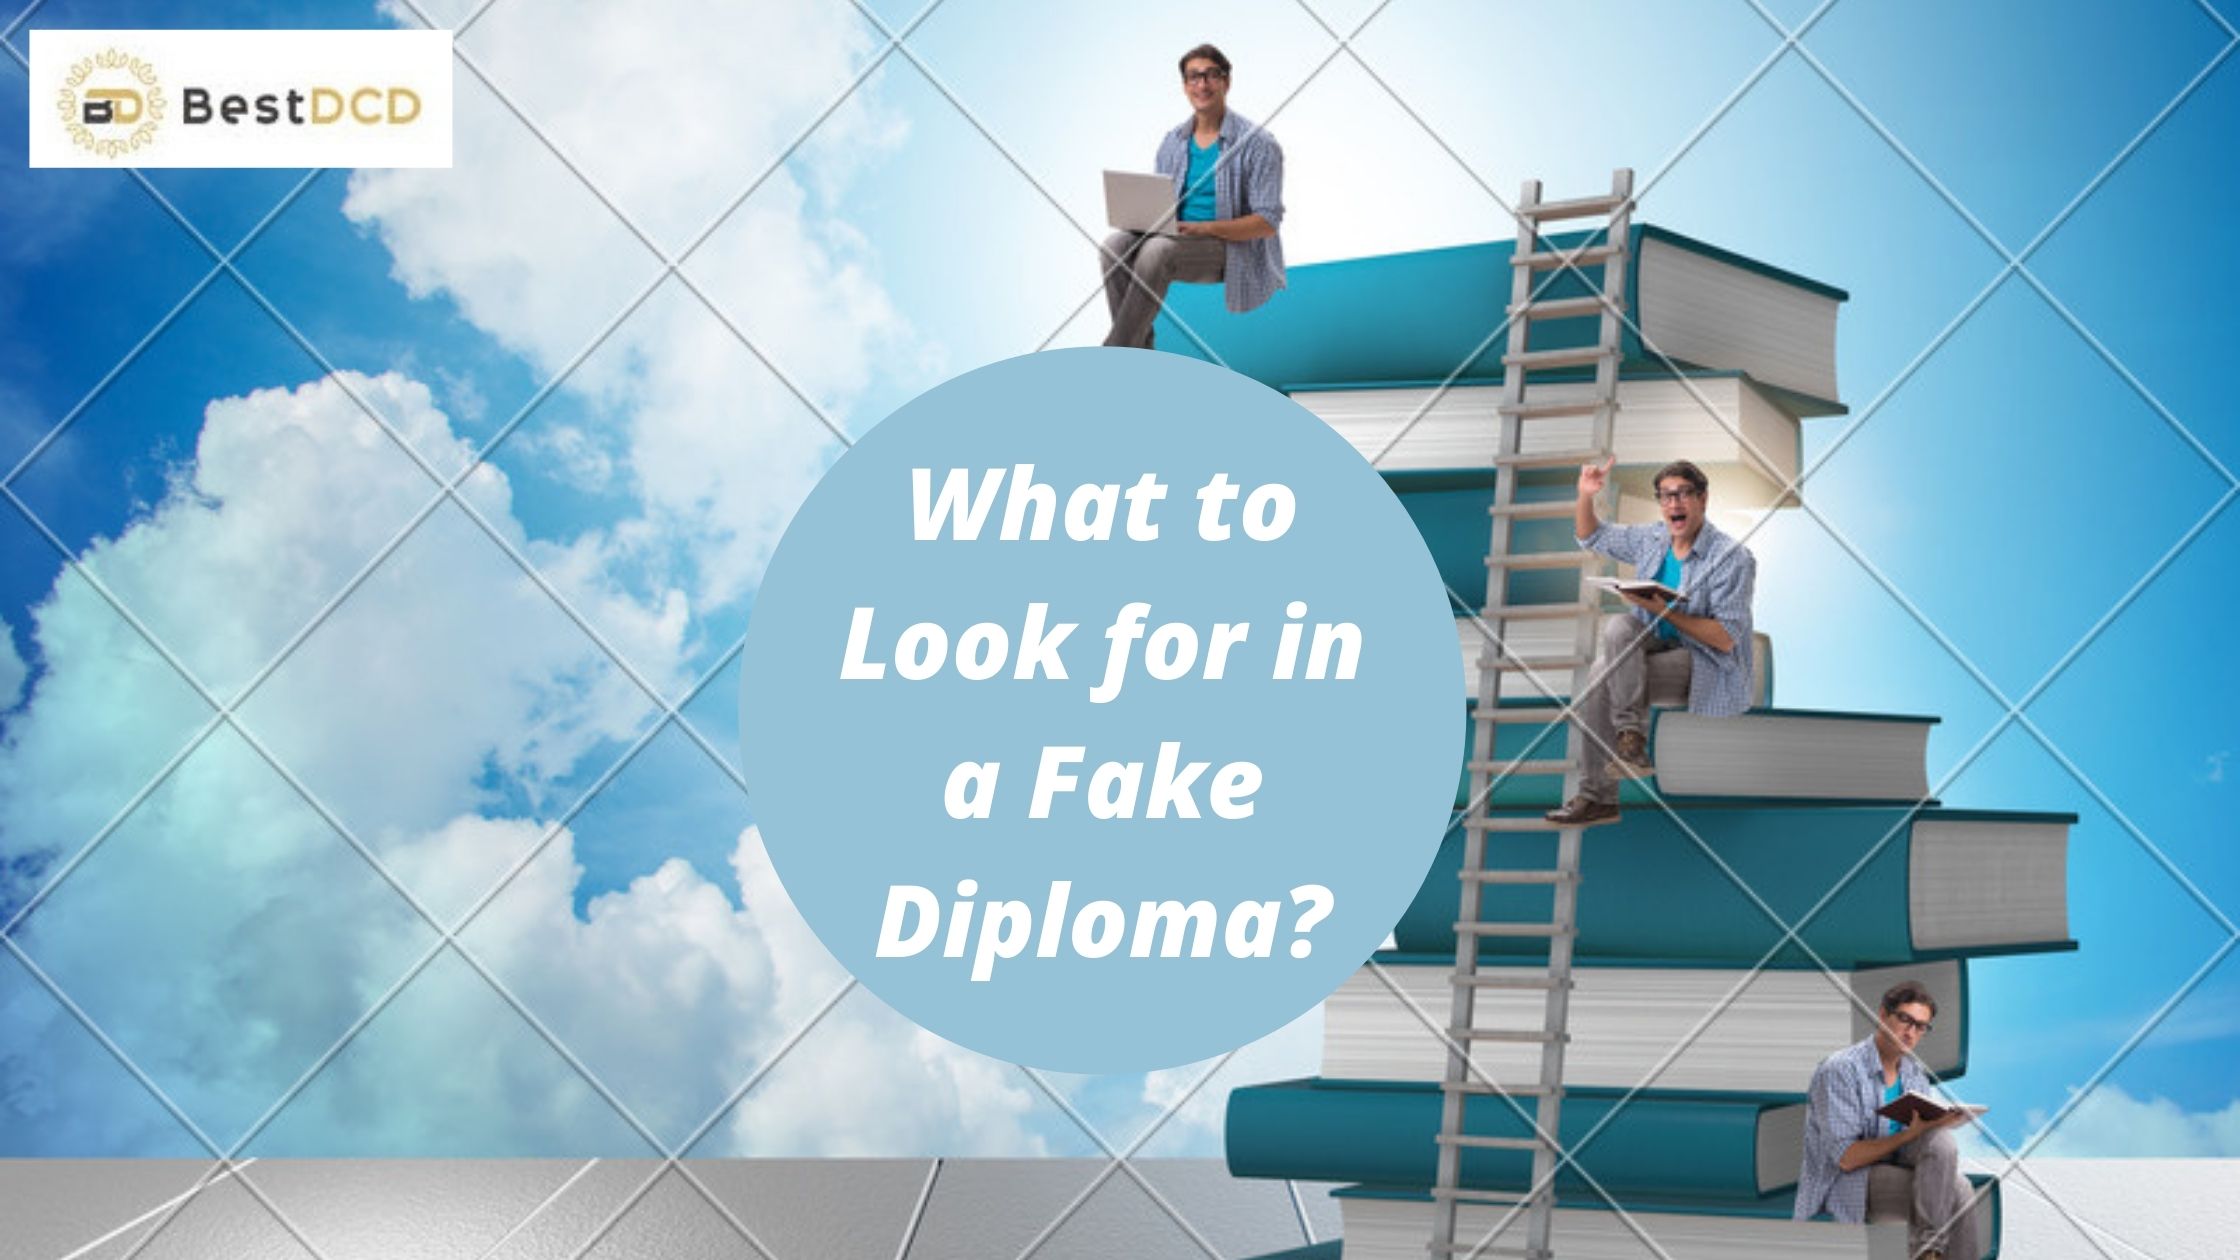 What to Look for in a Fake Diploma?